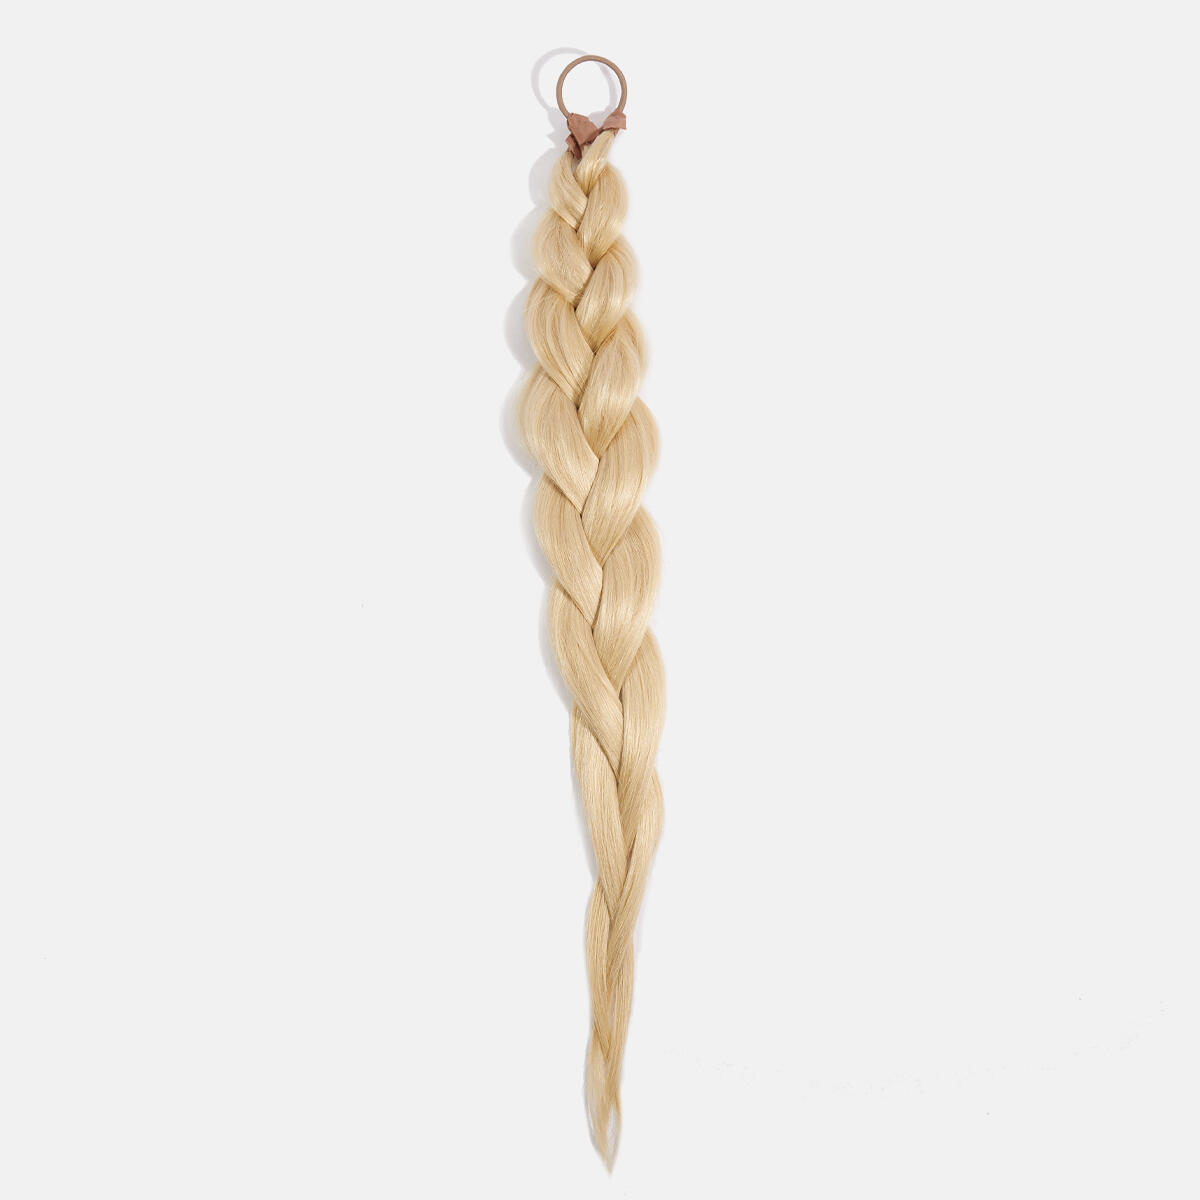 Hair pieces from Rapunzel of Sweden